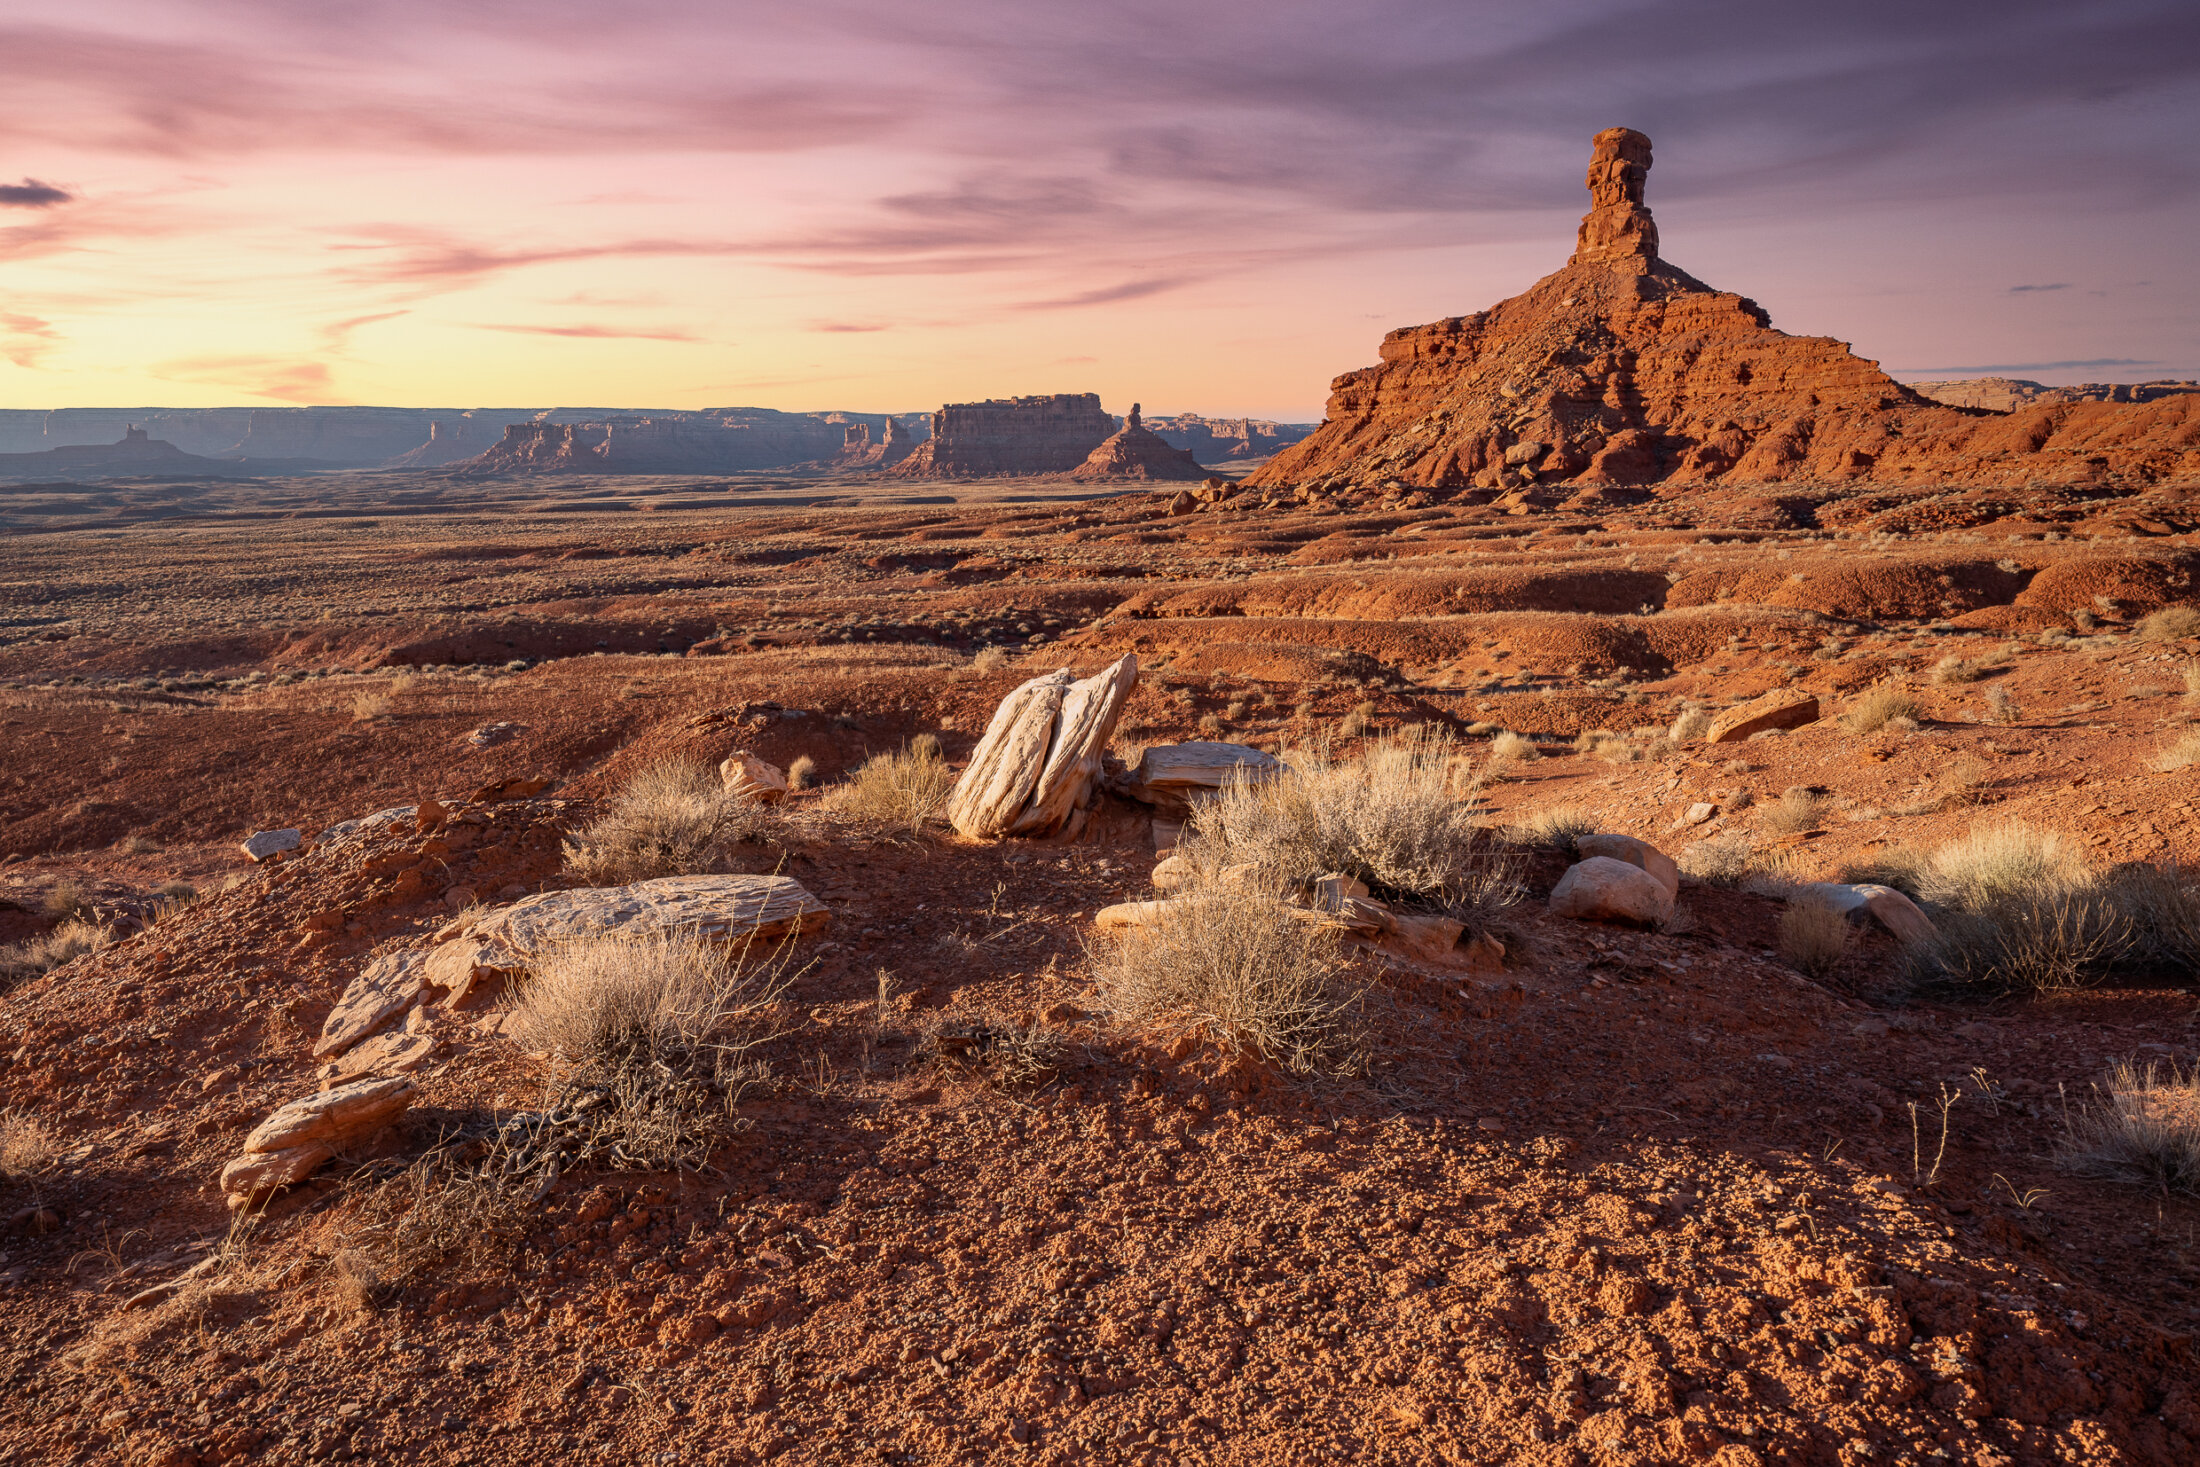 Sunset in the Valley of the Gods by Rooster Buttes